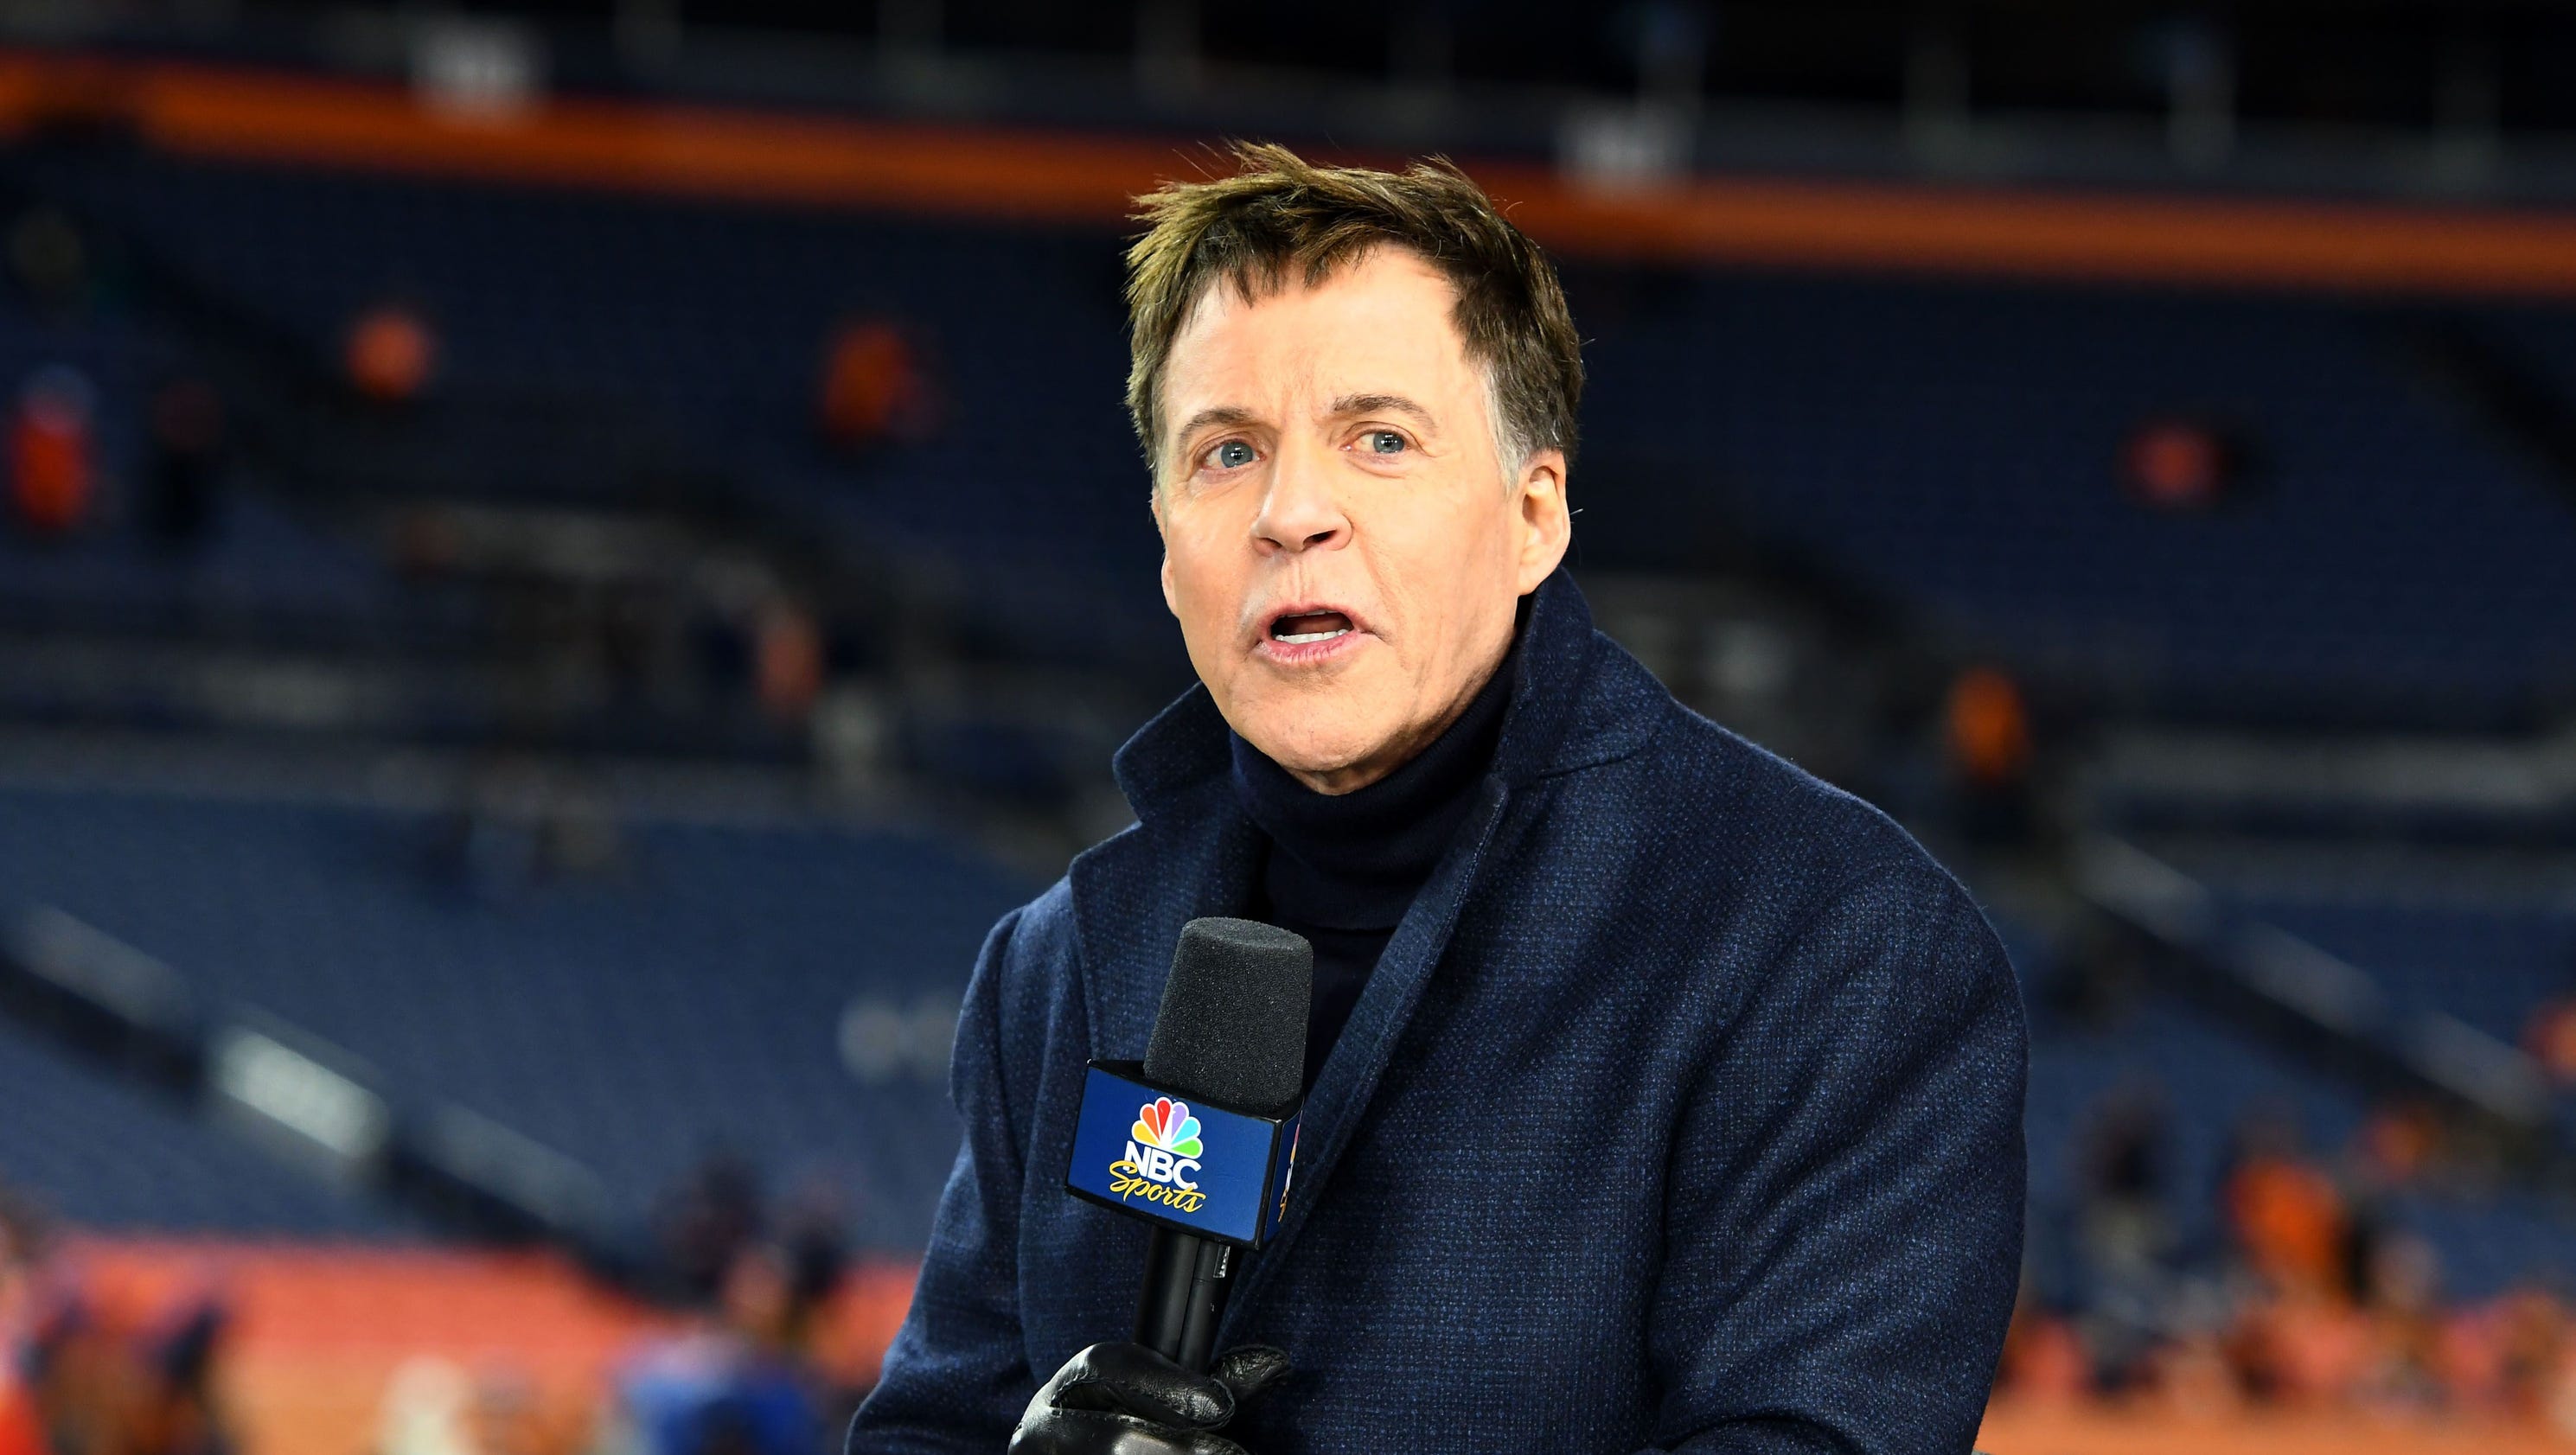 Brennan: Bob Costas has been the face of the Olympics for Americans